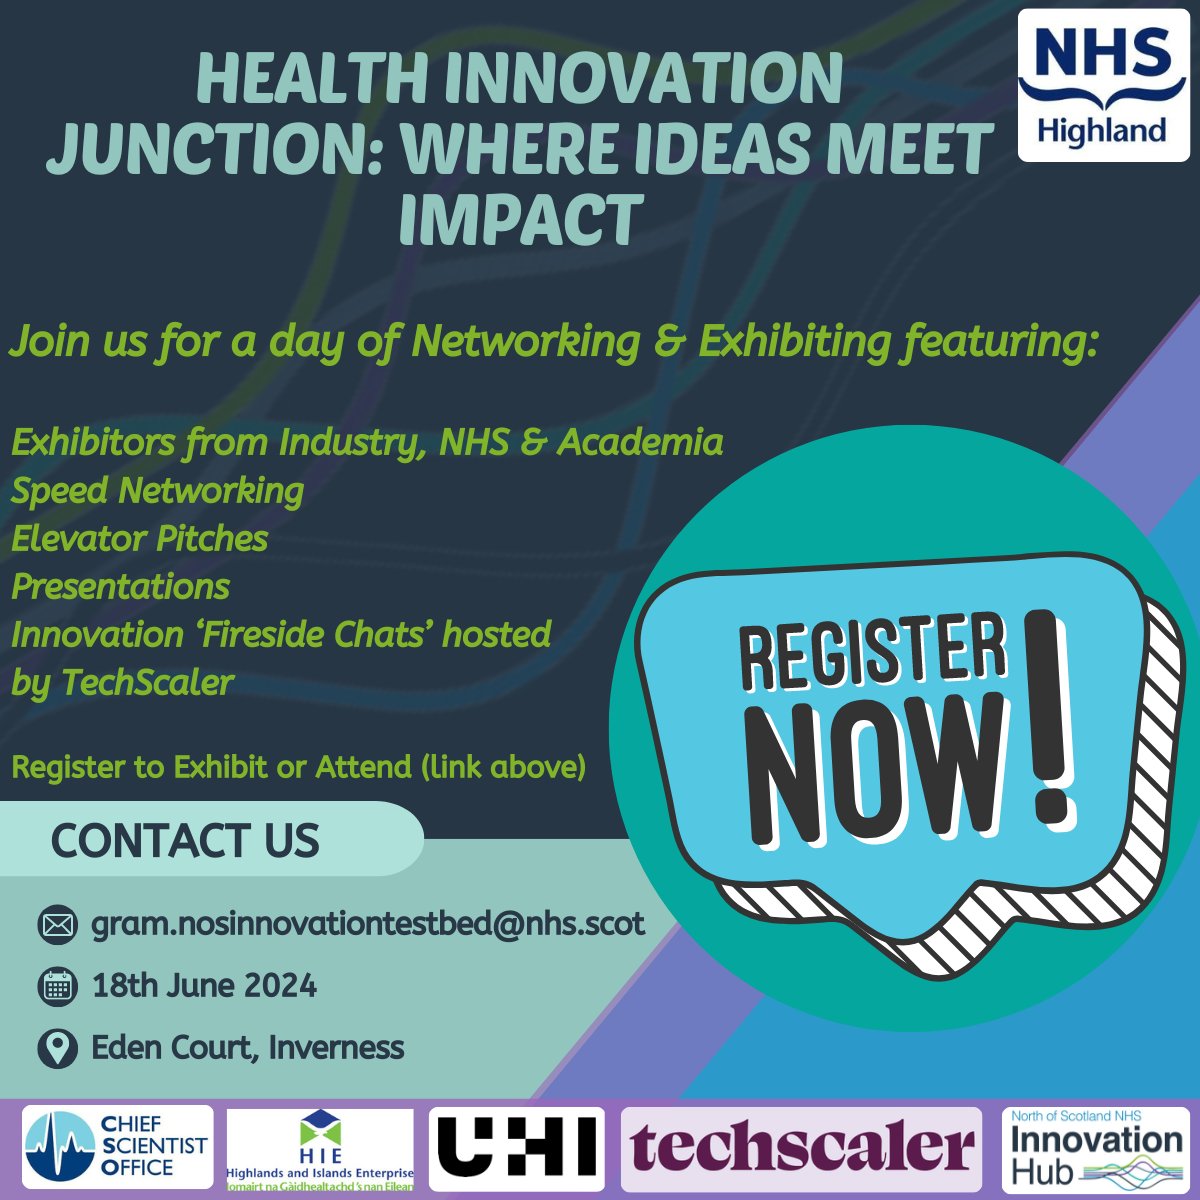 Join us in Inverness on 18th June 2024 for the Health Innovation Junction: Where Ideas Meet Impact. Register now to attend or exhibit: forms.office.com/pages/response… @NHSHresearch @ThinkUHI @HIEScotland @tech_scaler